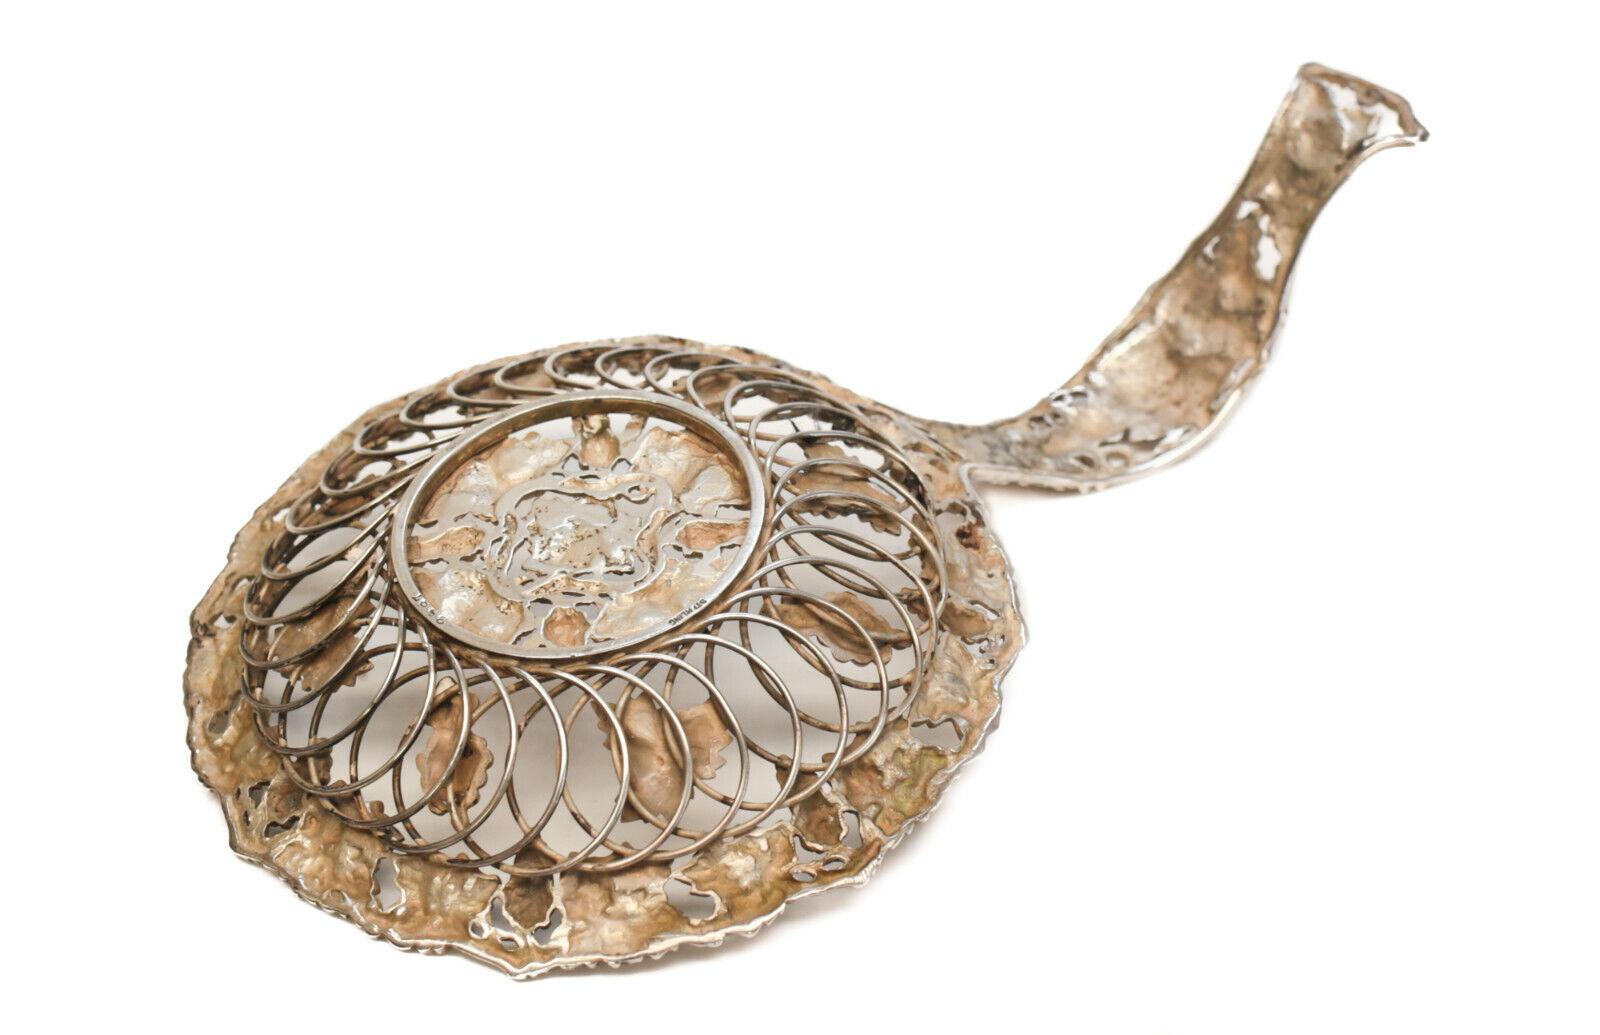 Theodore B. Starr sterling silver pierced fruit strainer #2587, circa 1900

Applied grapes and leaves throughout with branch like texture. Marked 